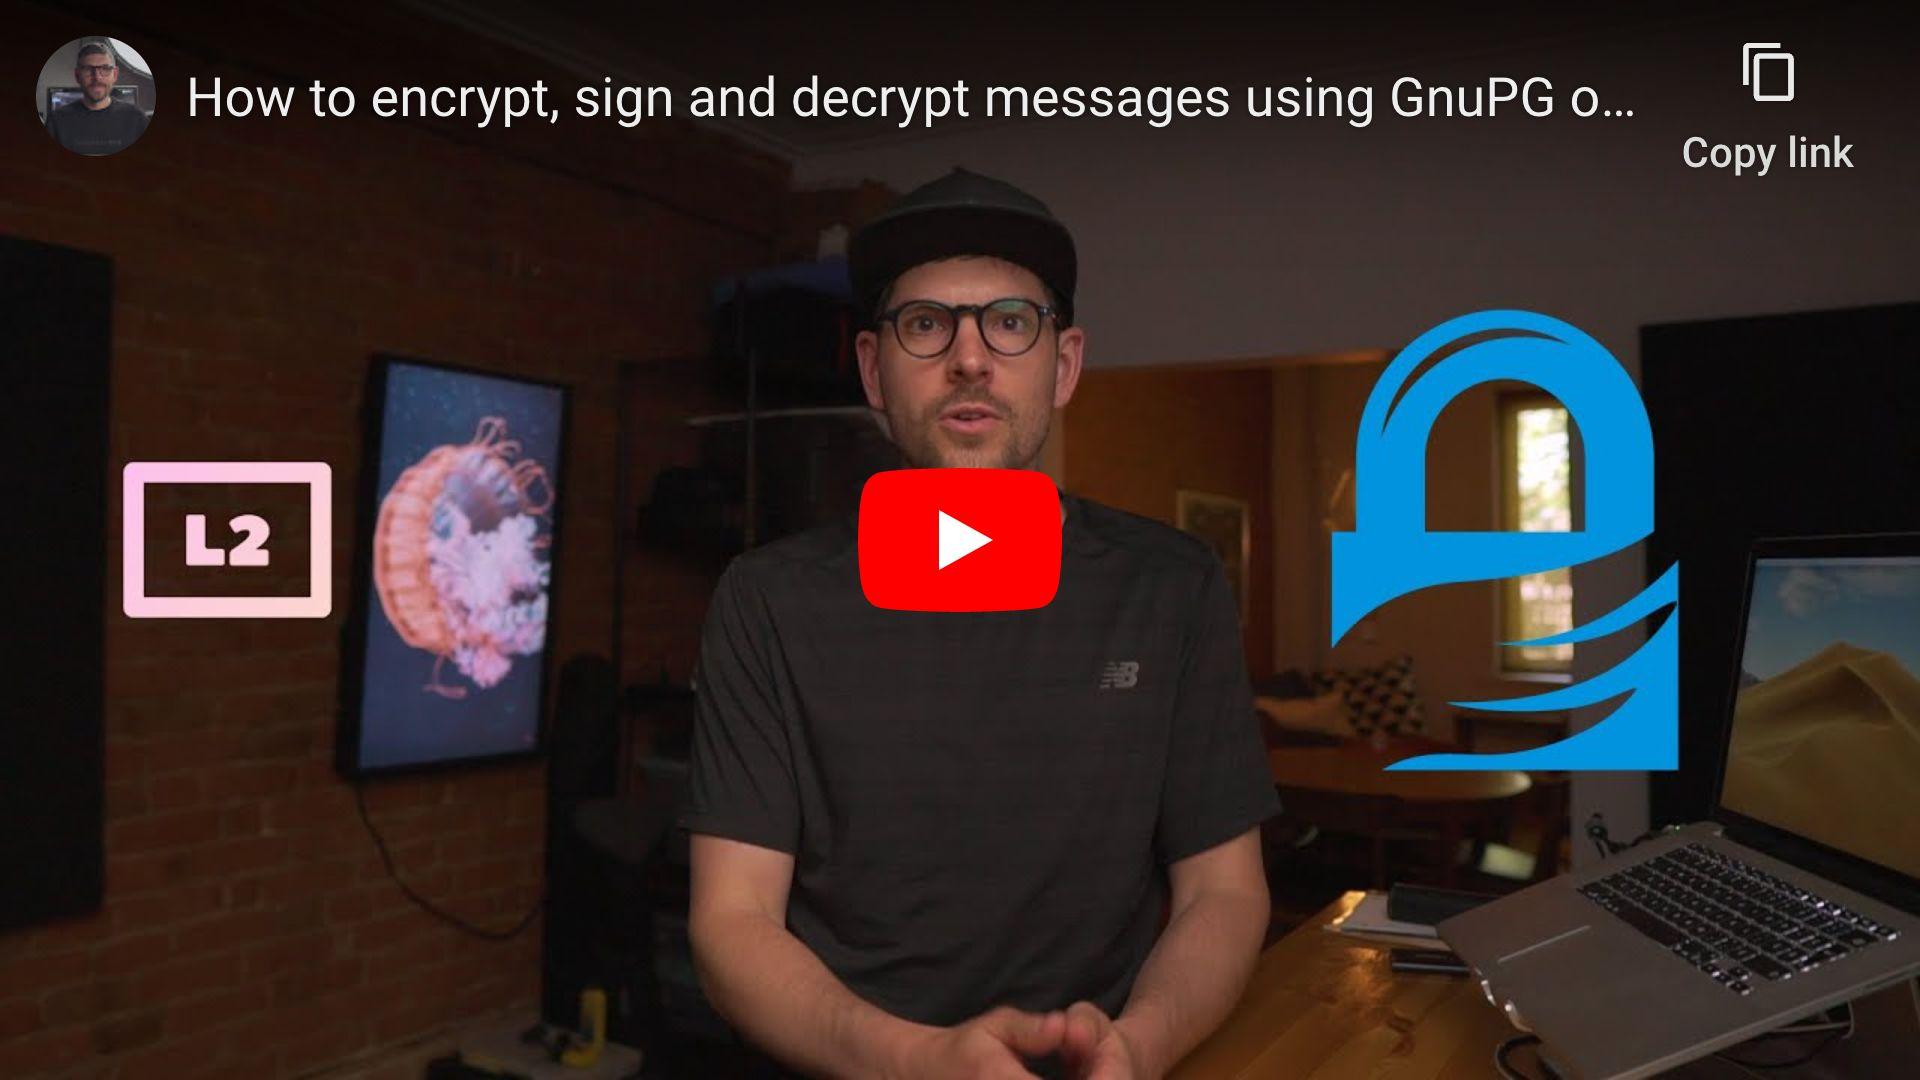 How to encrypt, sign and decrypt messages using GnuPG on macOS